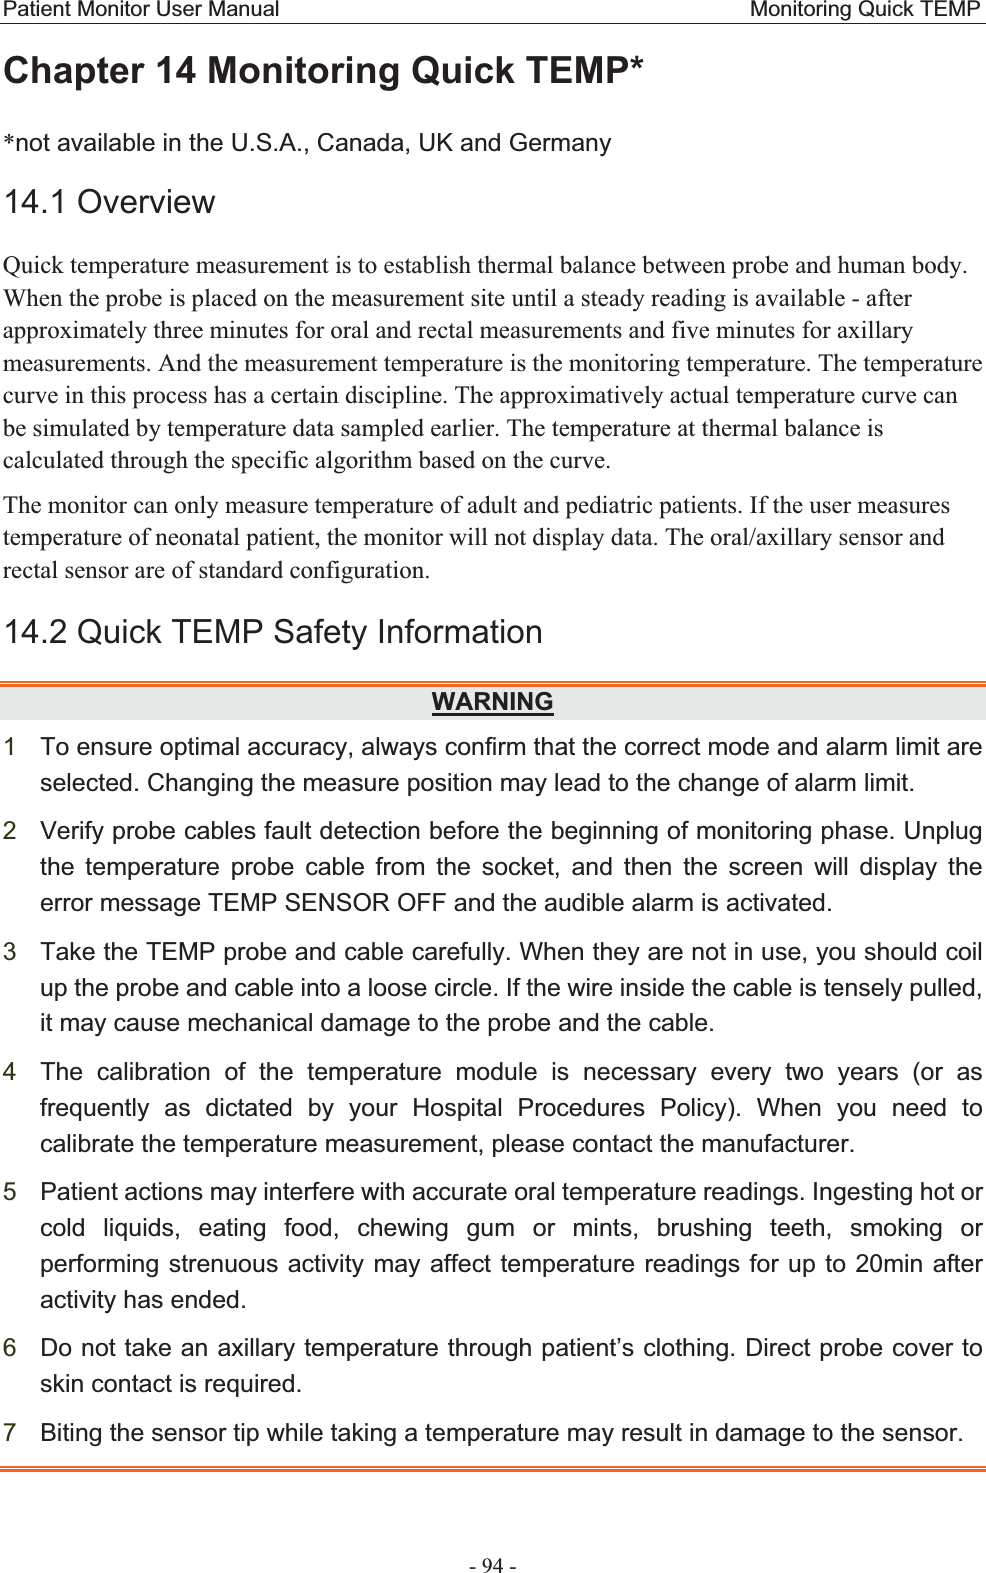 Patient Monitor User Manual                                           Monitoring Quick TEMP  - 94 - Chapter 14 Monitoring Quick TEMP* *not available in the U.S.A., Canada, UK and Germany 14.1 OverviewQuick temperature measurement is to establish thermal balance between probe and human body. When the probe is placed on the measurement site until a steady reading is available - after approximately three minutes for oral and rectal measurements and five minutes for axillary measurements. And the measurement temperature is the monitoring temperature. The temperature curve in this process has a certain discipline. The approximatively actual temperature curve can be simulated by temperature data sampled earlier. The temperature at thermal balance is calculated through the specific algorithm based on the curve.   The monitor can only measure temperature of adult and pediatric patients. If the user measures temperature of neonatal patient, the monitor will not display data. The oral/axillary sensor and rectal sensor are of standard configuration. 14.2 Quick TEMP Safety Information WARNING1To ensure optimal accuracy, always confirm that the correct mode and alarm limit are selected. Changing the measure position may lead to the change of alarm limit.   2Verify probe cables fault detection before the beginning of monitoring phase. Unplug the temperature probe cable from the socket, and then the screen will display the error message TEMP SENSOR OFF and the audible alarm is activated. 3Take the TEMP probe and cable carefully. When they are not in use, you should coil up the probe and cable into a loose circle. If the wire inside the cable is tensely pulled, it may cause mechanical damage to the probe and the cable. 4The calibration of the temperature module is necessary every two years (or as frequently as dictated by your Hospital Procedures Policy). When you need to calibrate the temperature measurement, please contact the manufacturer. 5Patient actions may interfere with accurate oral temperature readings. Ingesting hot or cold liquids, eating food, chewing gum or mints, brushing teeth, smoking or performing strenuous activity may affect temperature readings for up to 20min after activity has ended. 6Do not take an axillary temperature through patient’s clothing. Direct probe cover to skin contact is required. 7Biting the sensor tip while taking a temperature may result in damage to the sensor.   